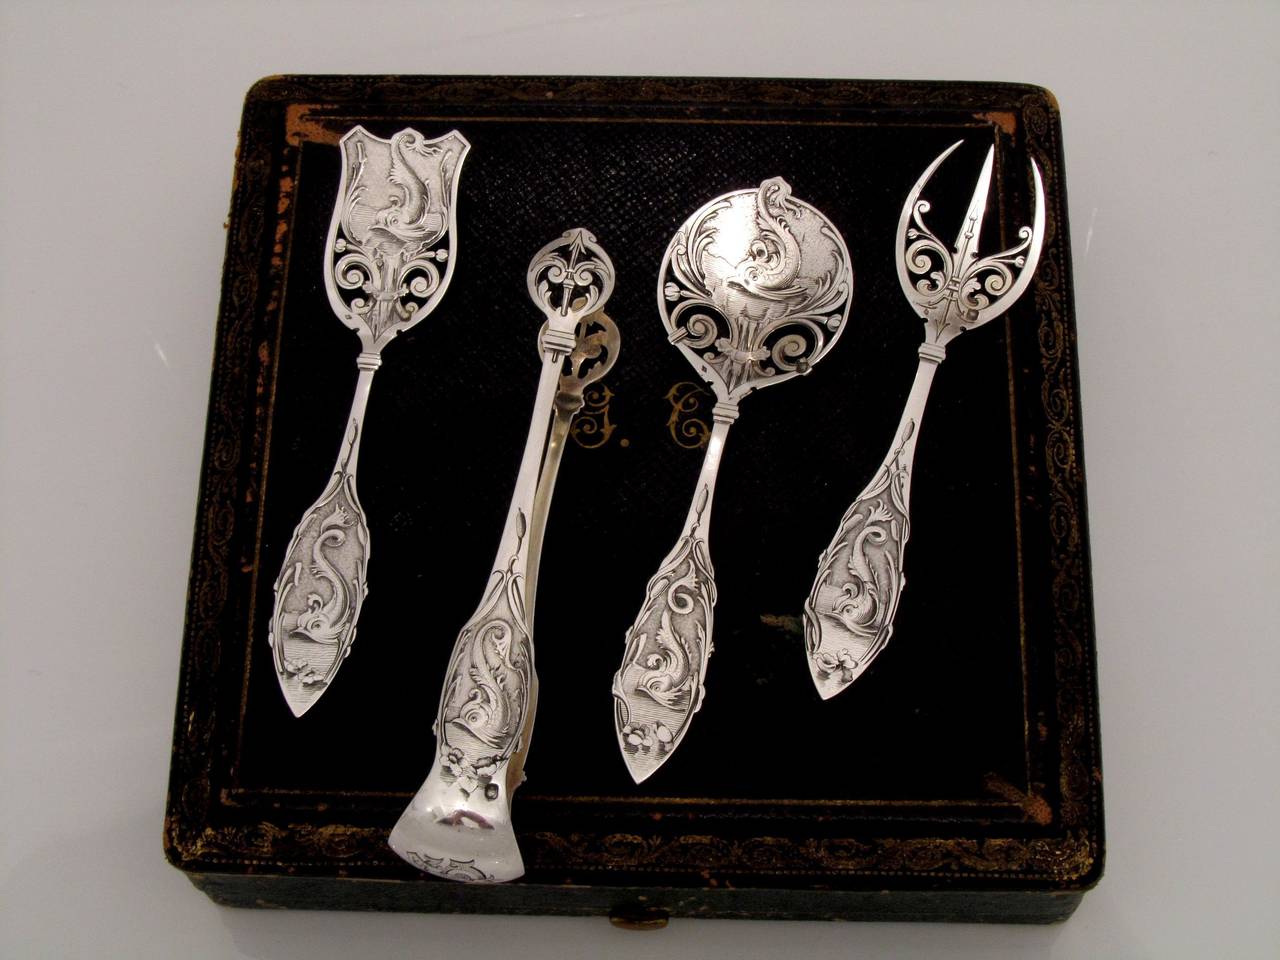 Women's or Men's Odiot Rare French Dolphin All Sterling Silver Dessert Set 4 pc with Original Box